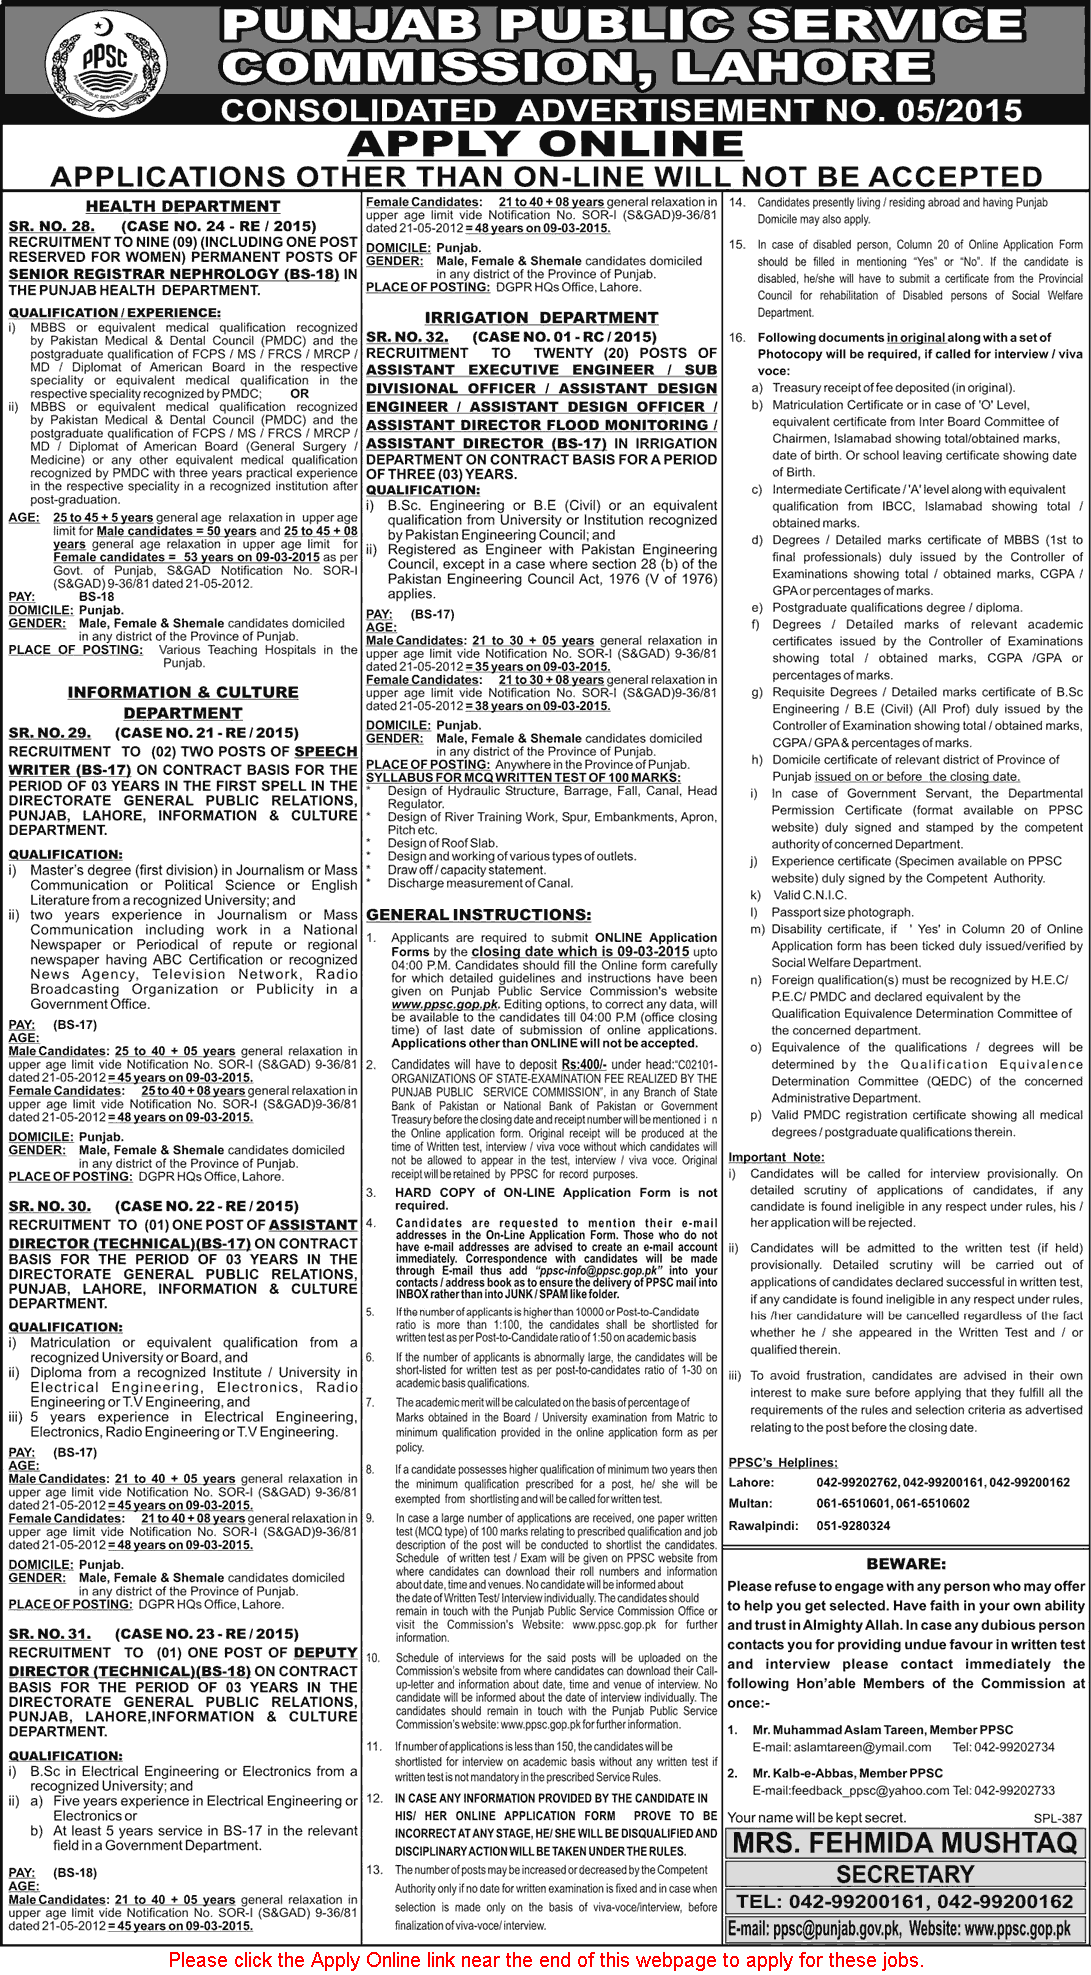 PPSC Jobs February 2015 Consolidated Advertisement No 05/2015 (5) Latest